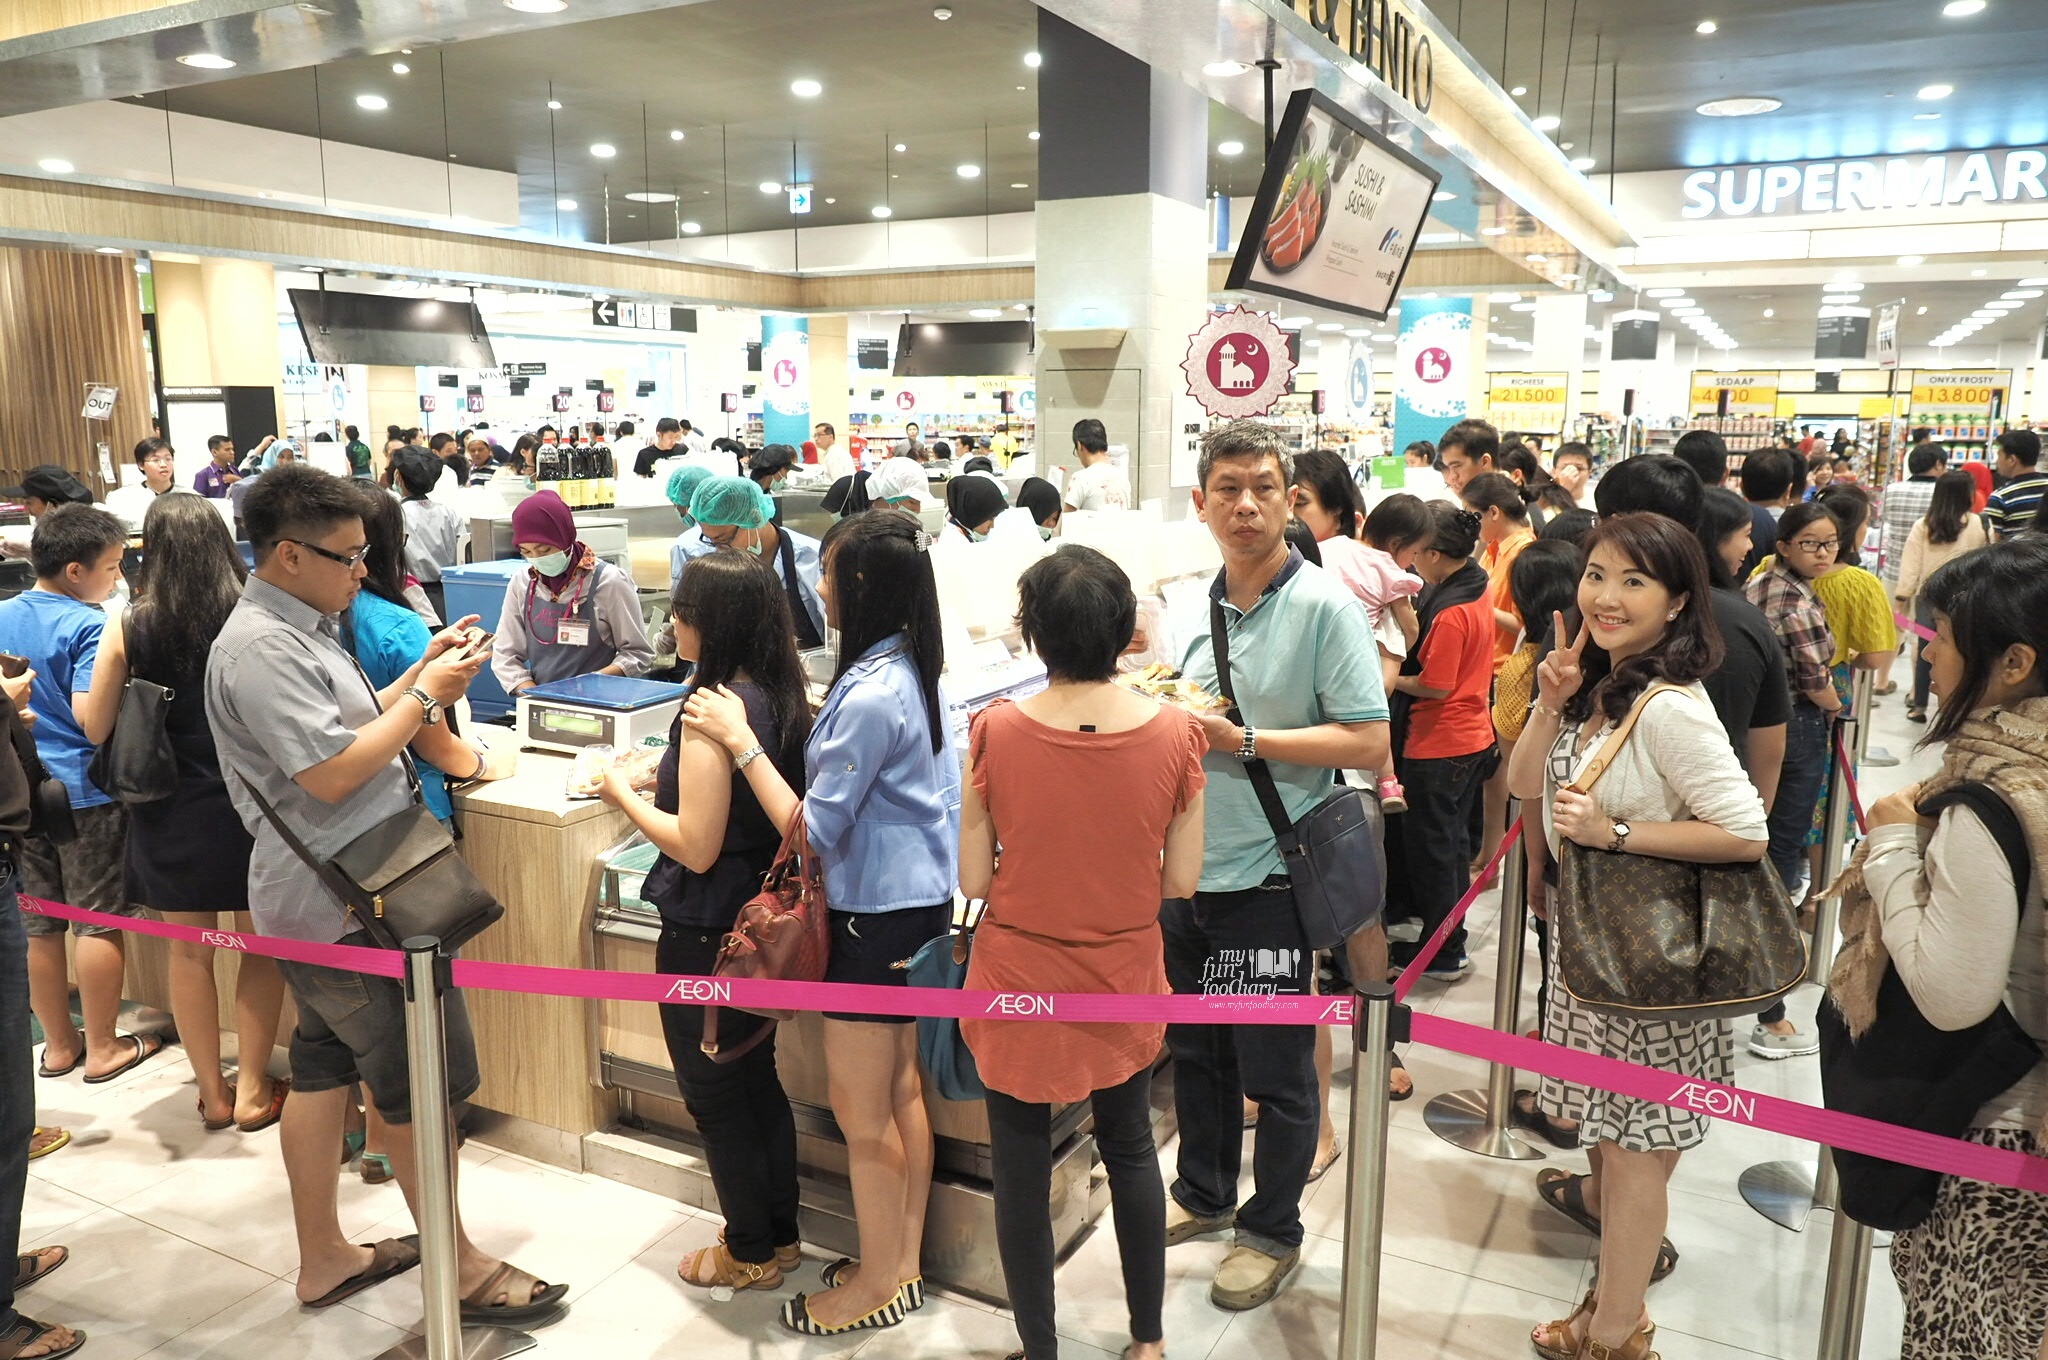 The Crowd at Sushi and Bento Counter AEON Mall by Myfunfoodiary